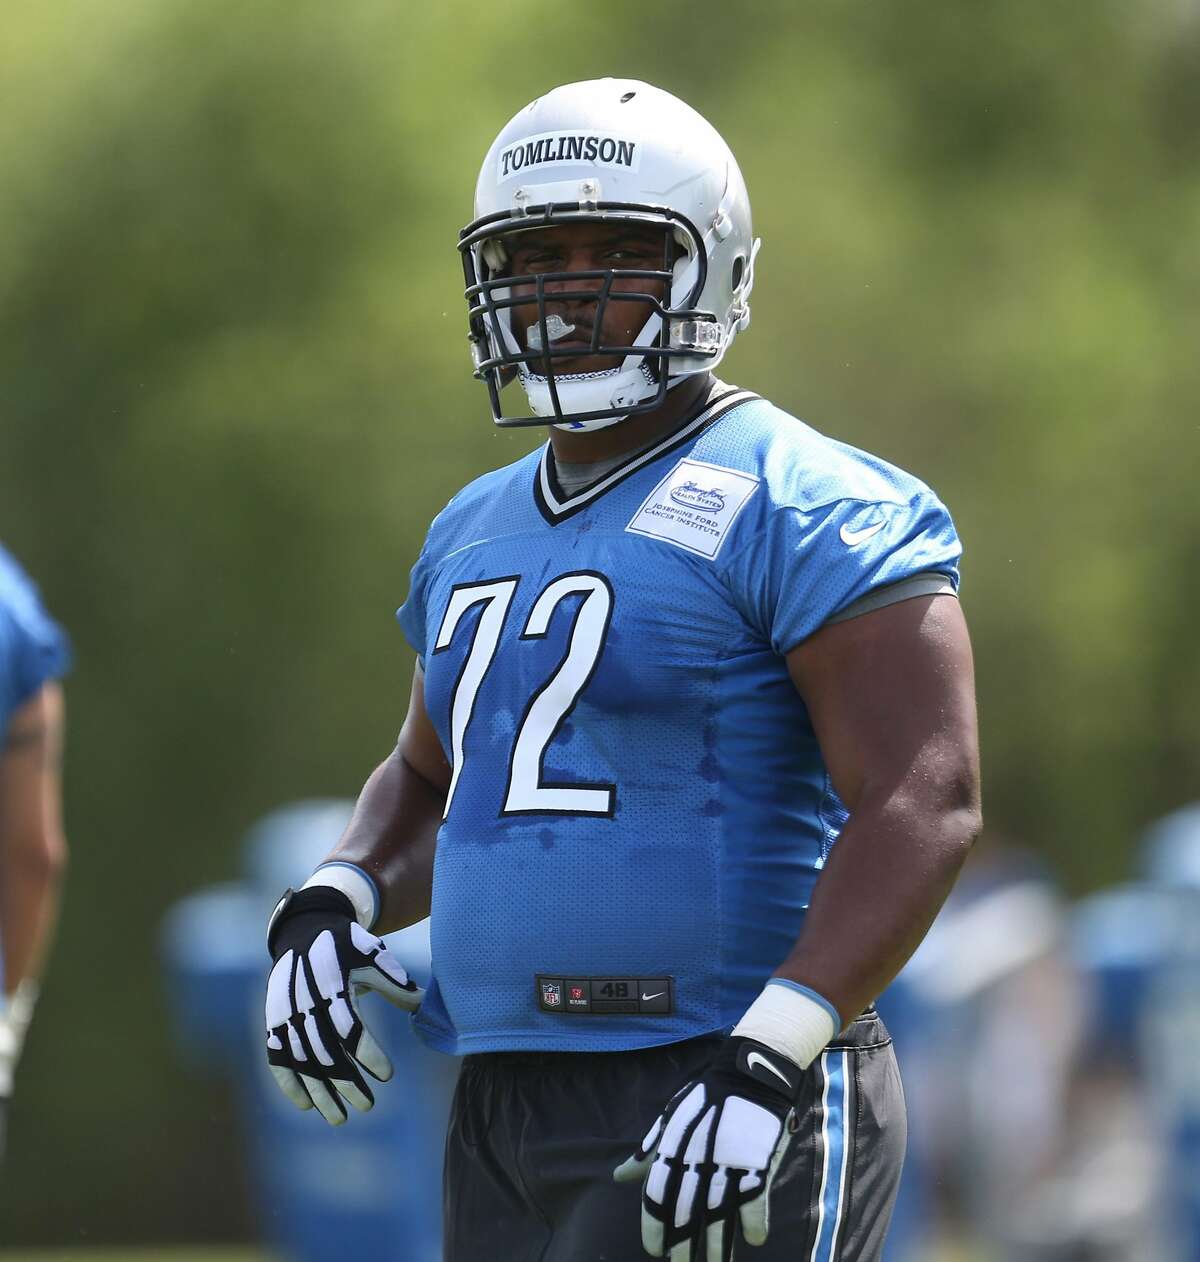 Offensive lineman Laken Tomlinson goes through drills during the Detroit Lions rookie mini camp at the team's Allen Park, Mich., practice facility on May 8, 2015. (Kirthmon F. Dozier/Detroit Free Press/TNS)